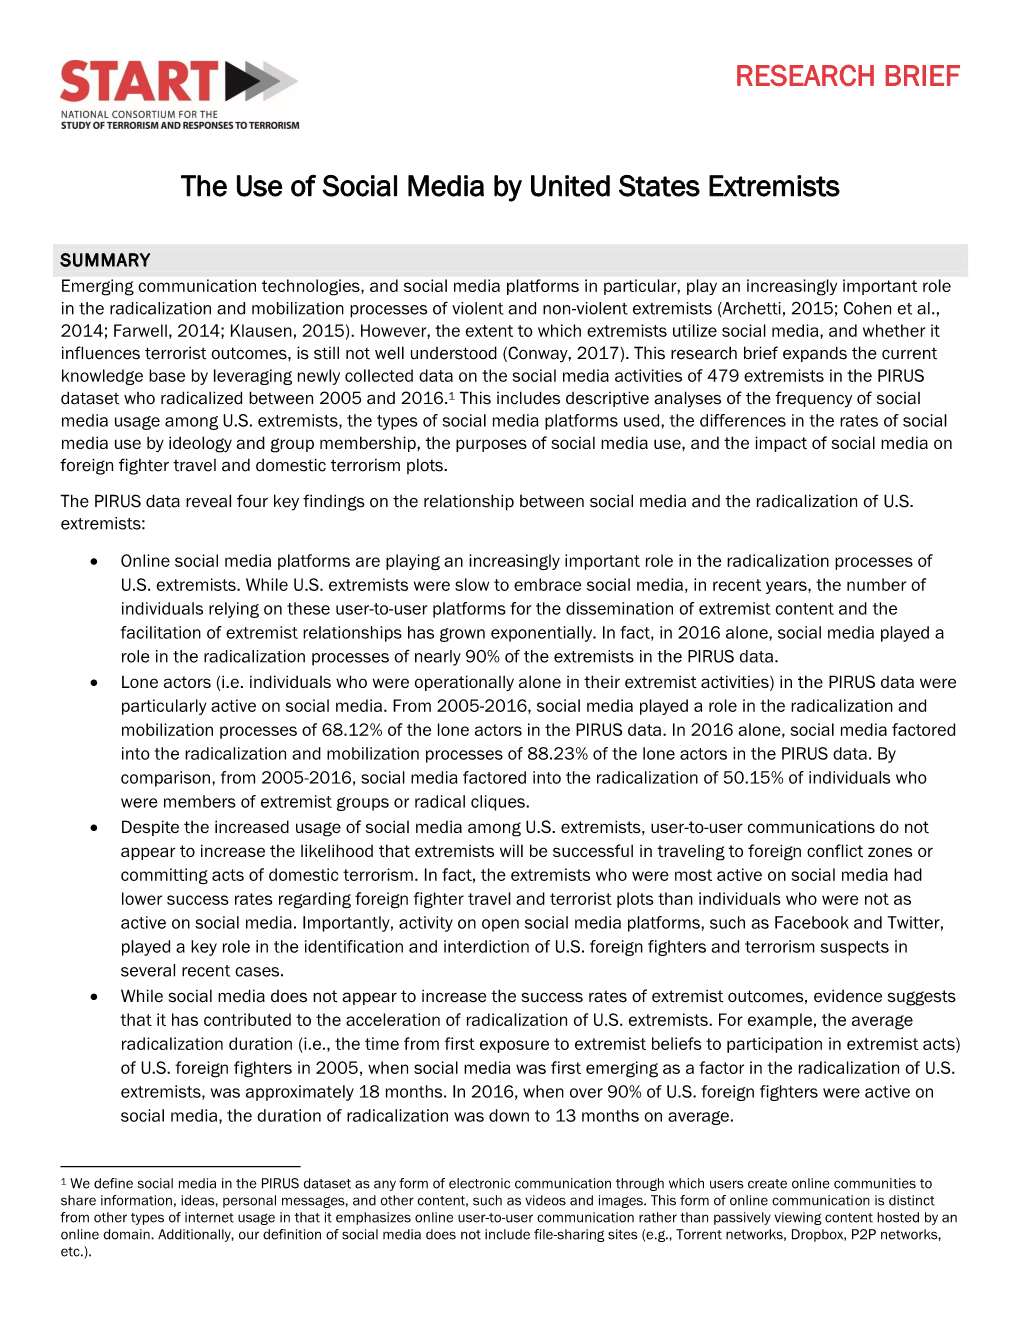 The Use of Social Media by United States Extremists